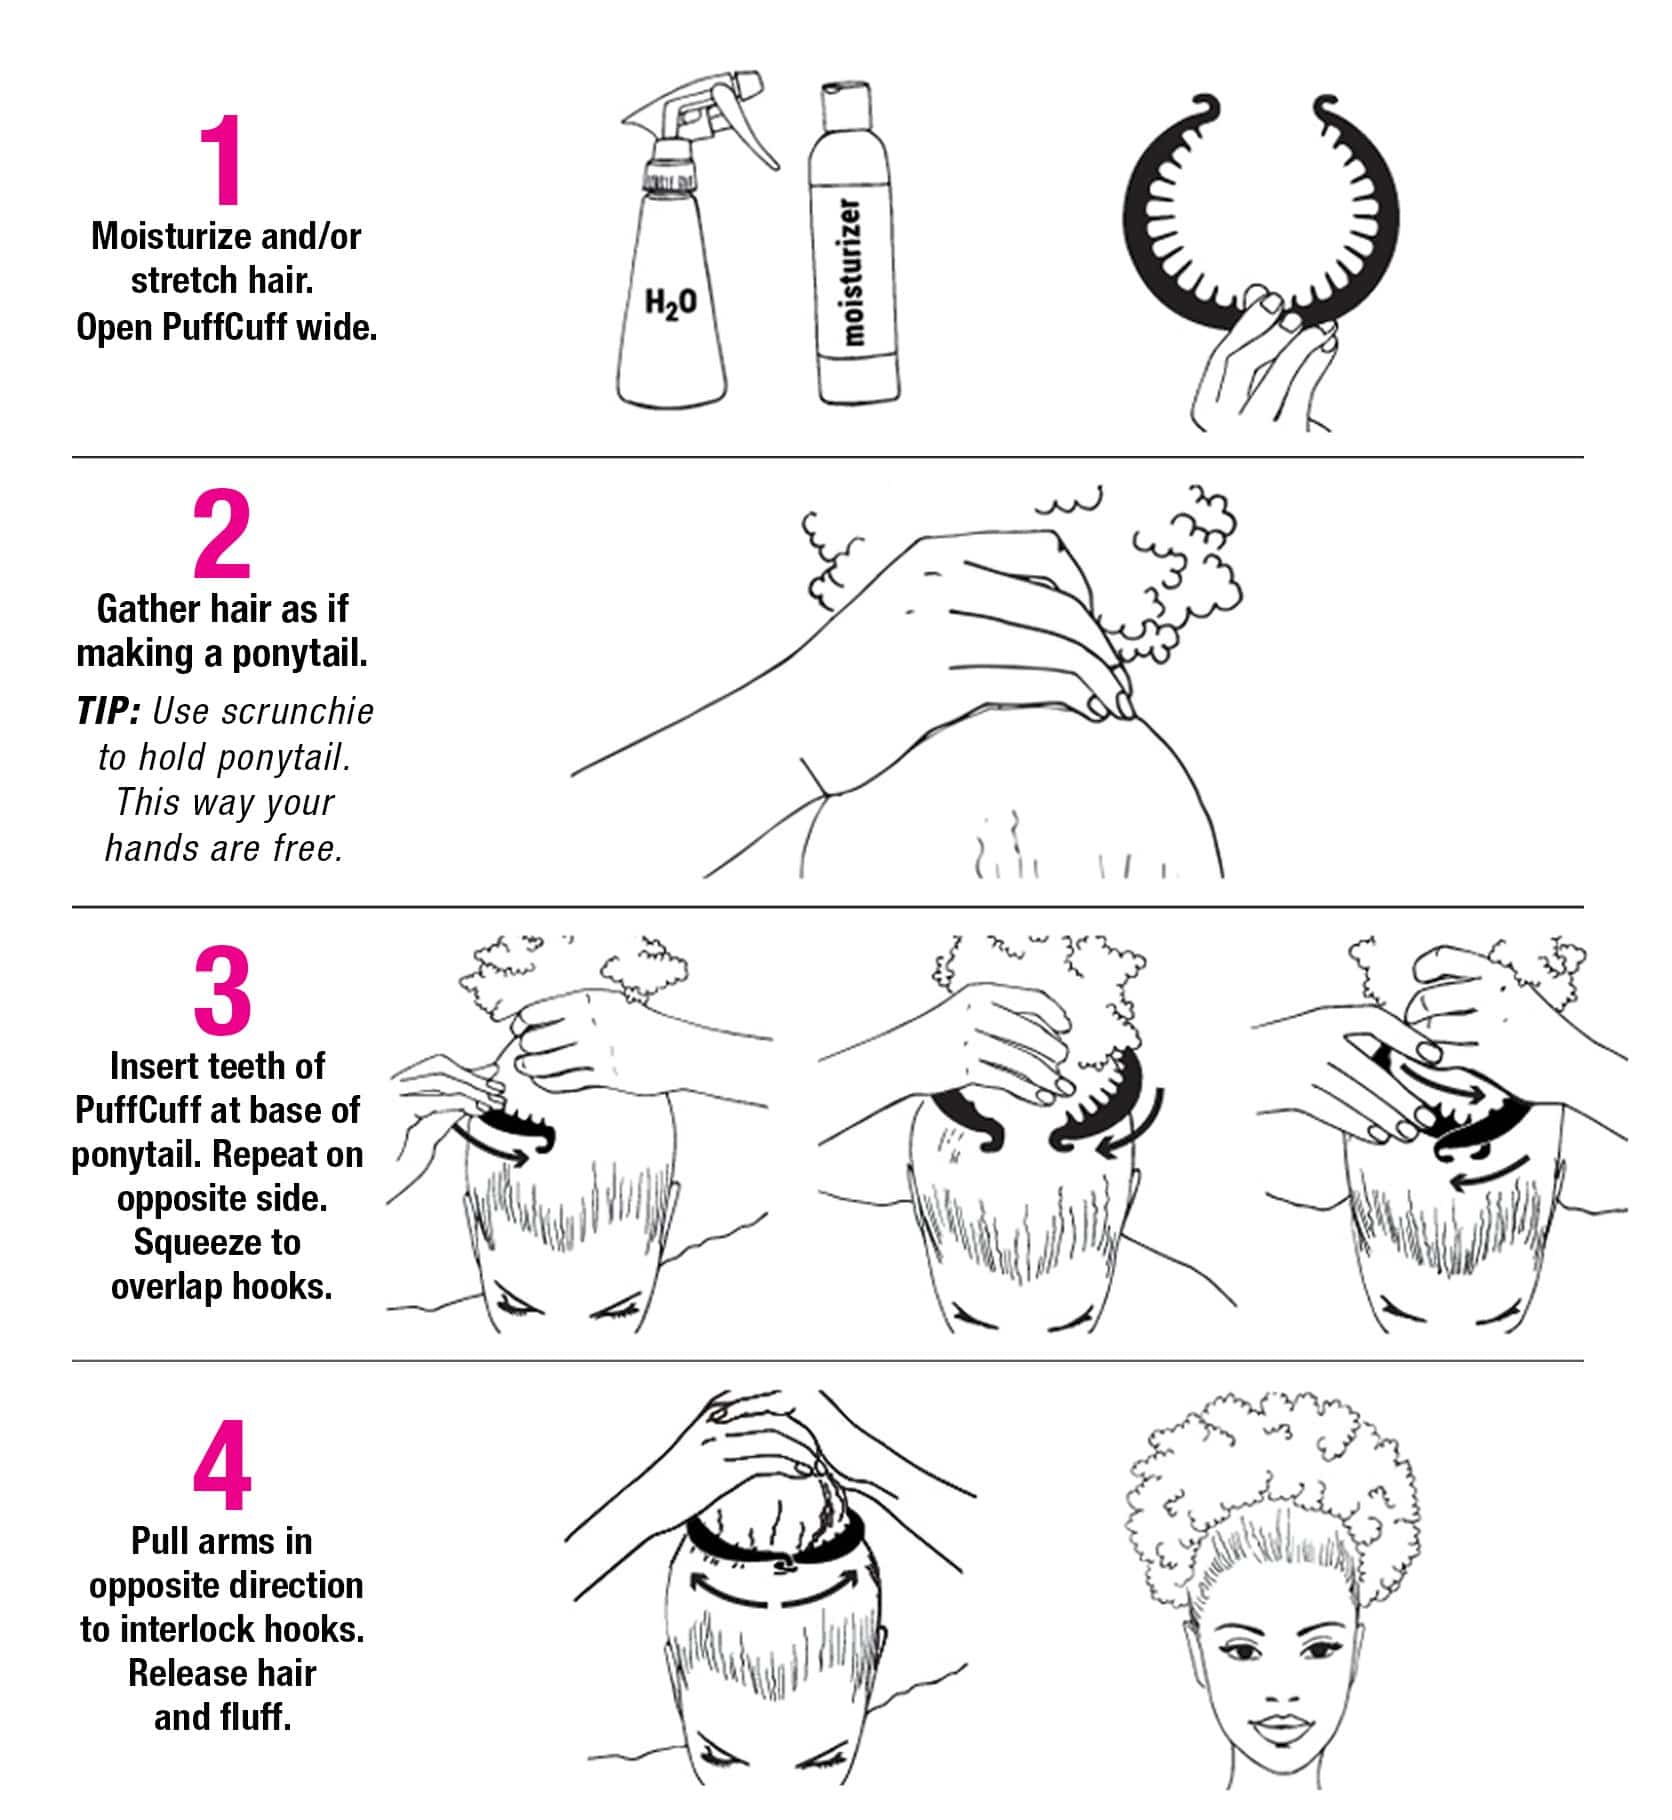 PuffCuff HowTo Guide curly girl godkendt produkt forhandles ved ww.curlsforyou.dk din curly girl shop